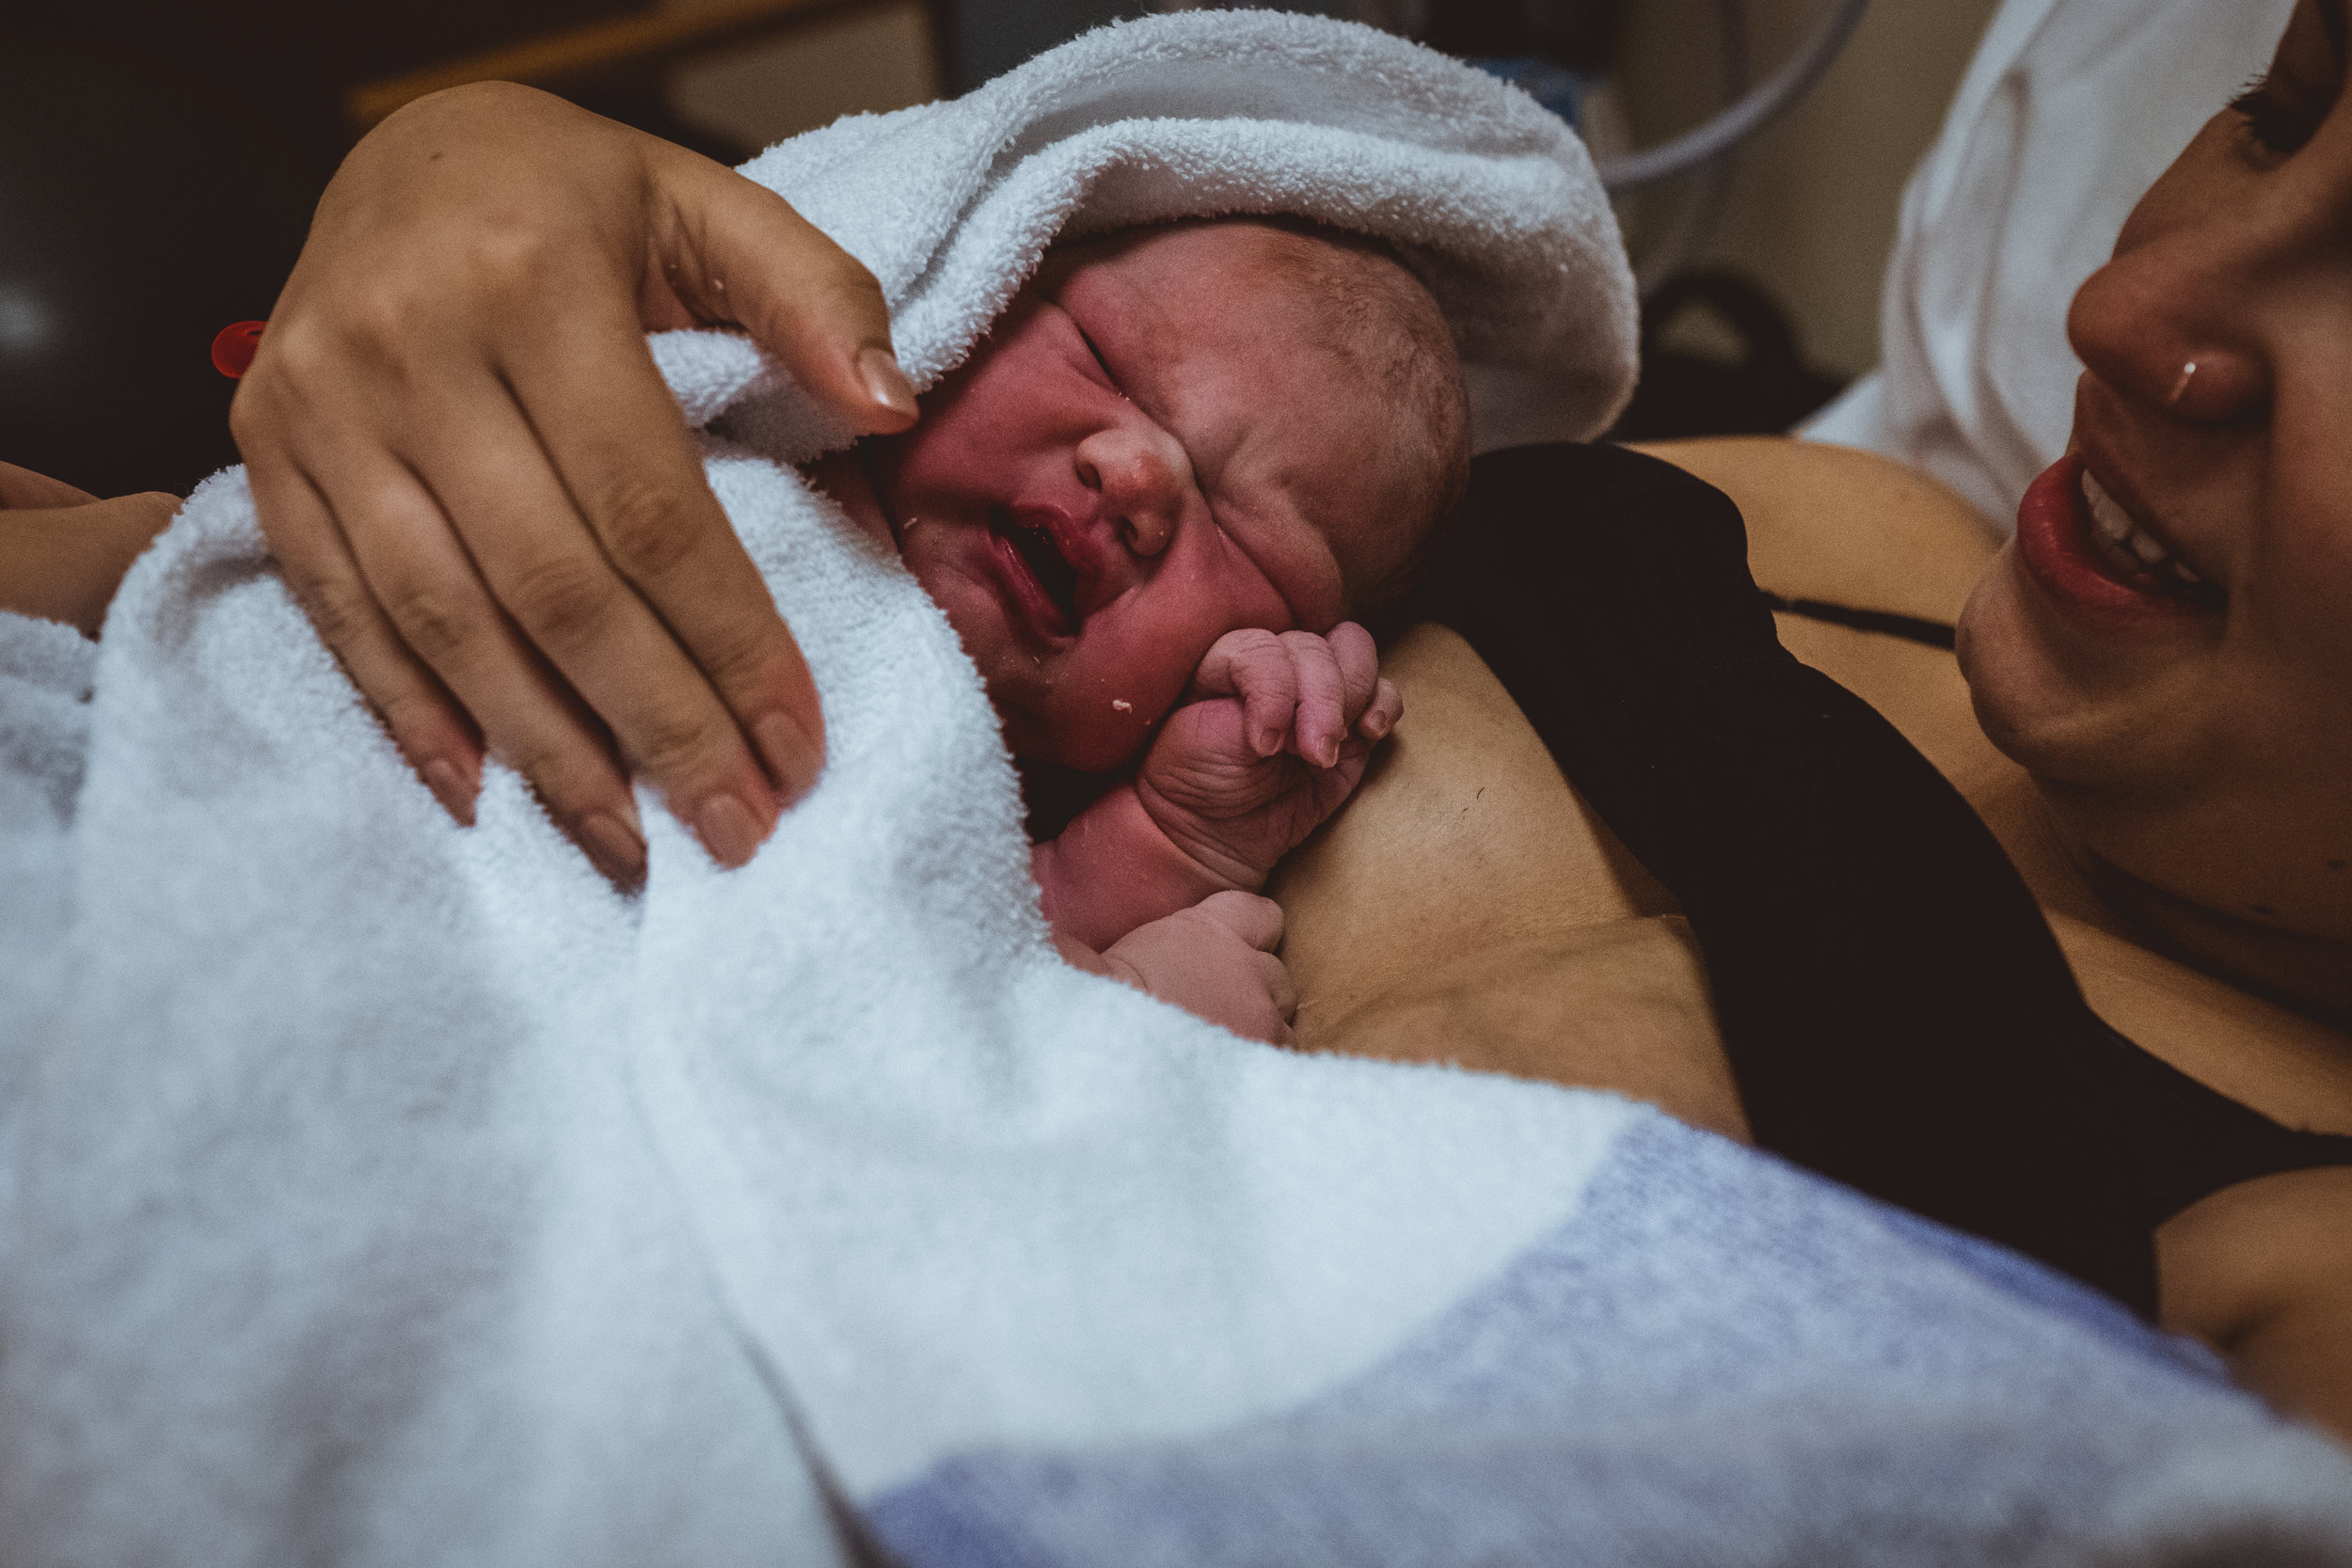 Birth Photographer, Sarah Marsden captures minutes old new born after her birth in Mansfield, Nottinghamshire.